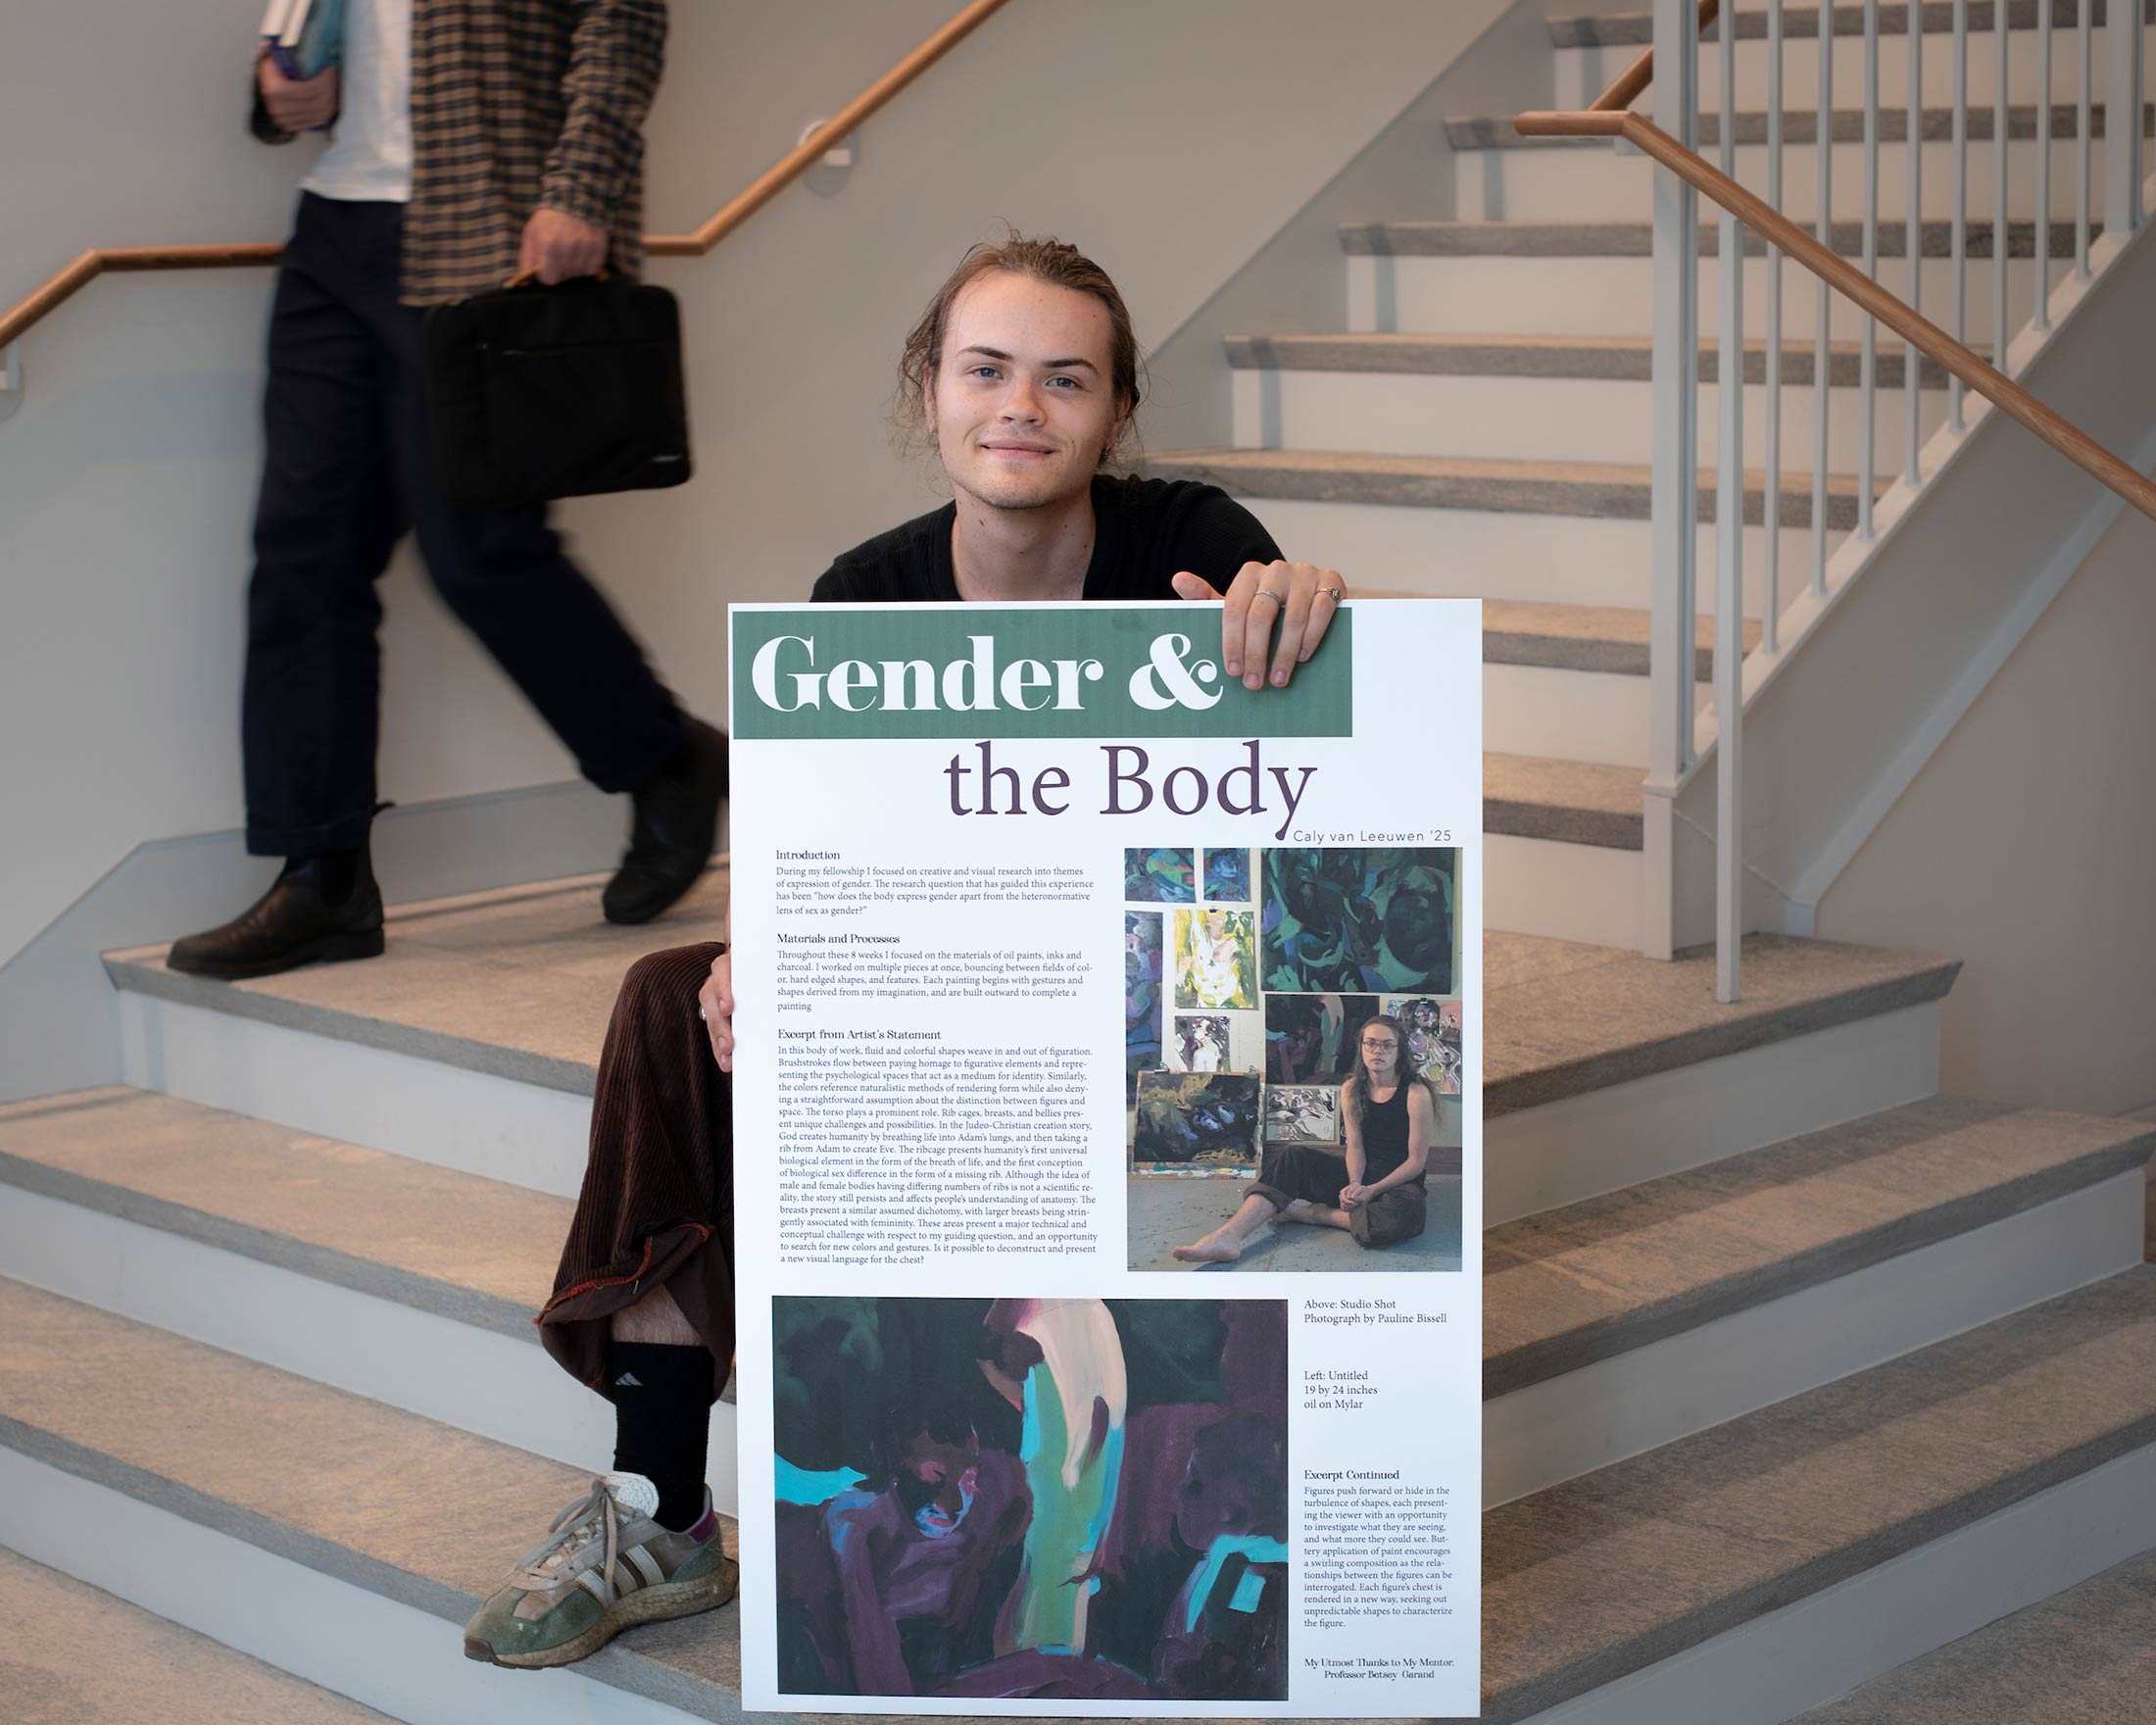 Caly Van Leeuwen holds his research poster titled Gender and the Body.